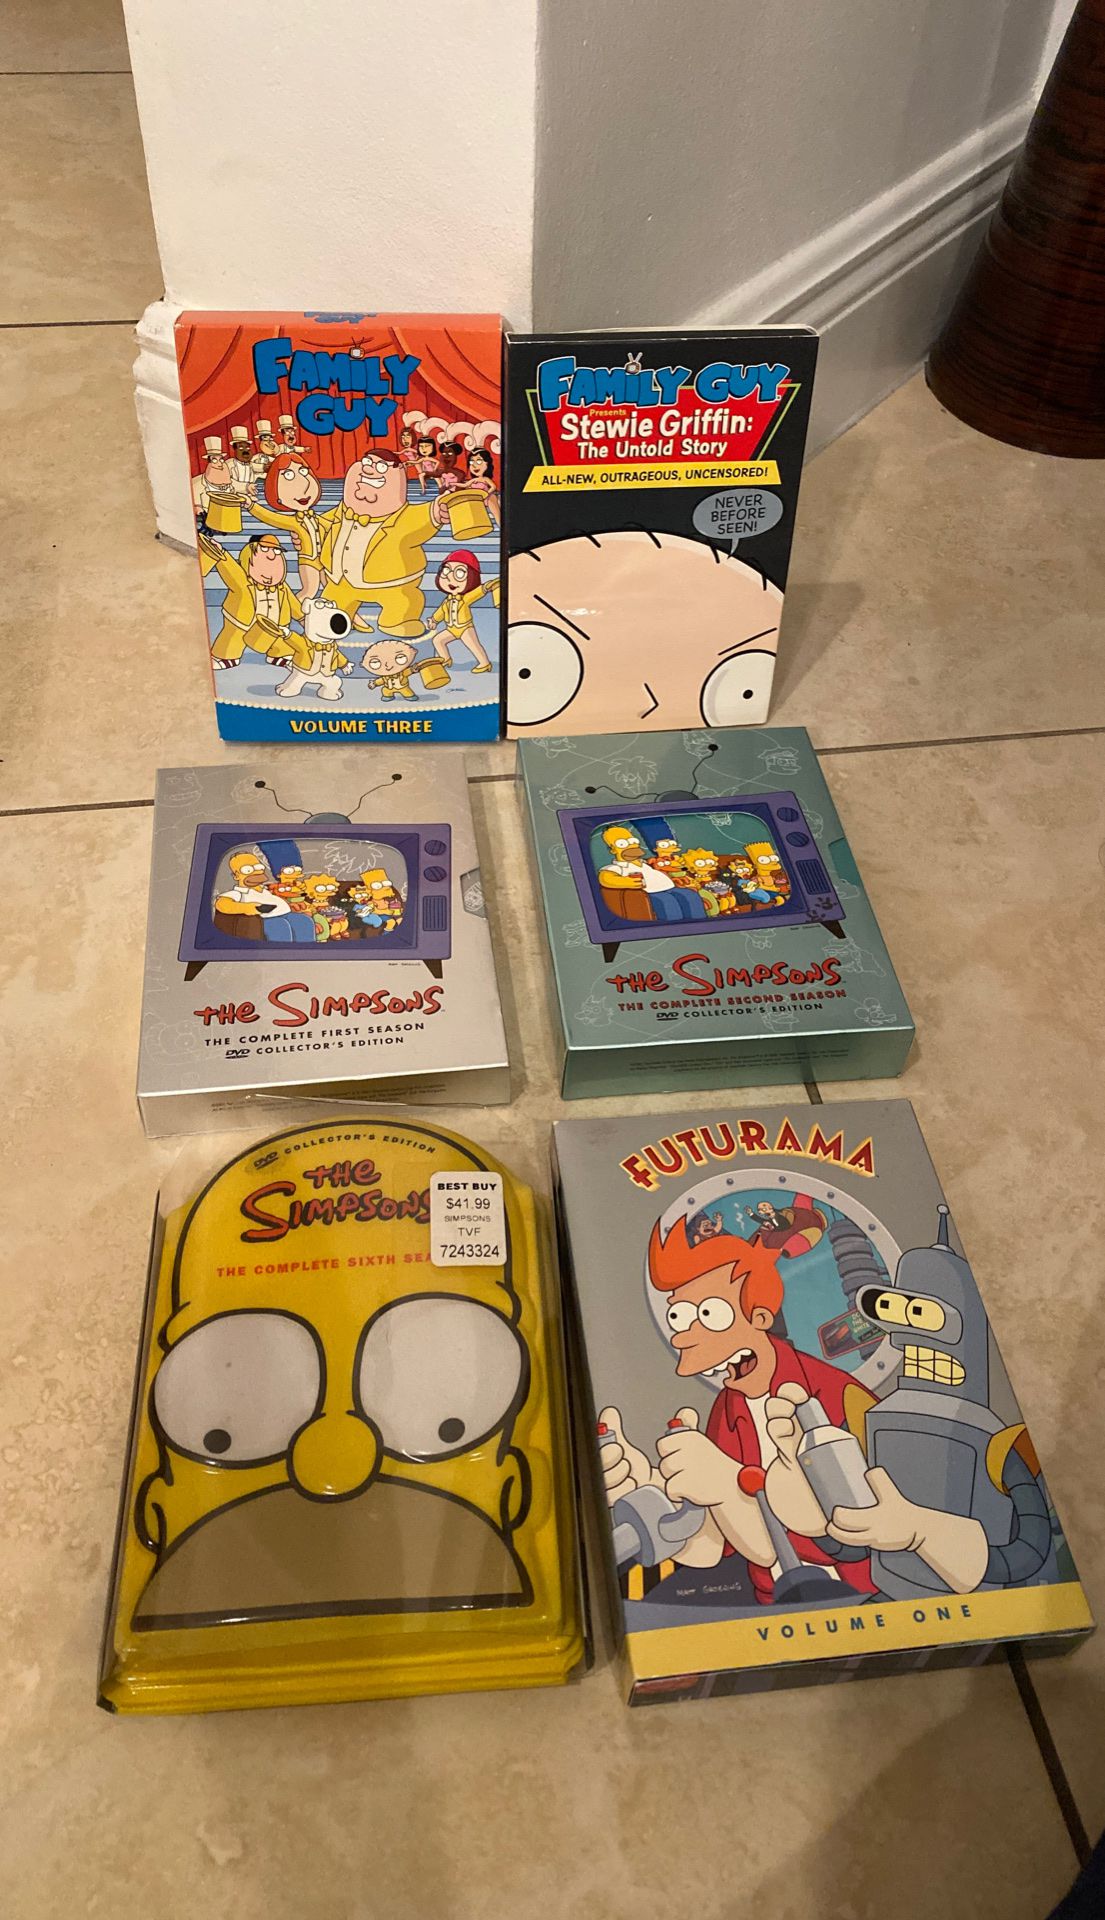 Family Guy, The Simpsons, Futurama DVDs